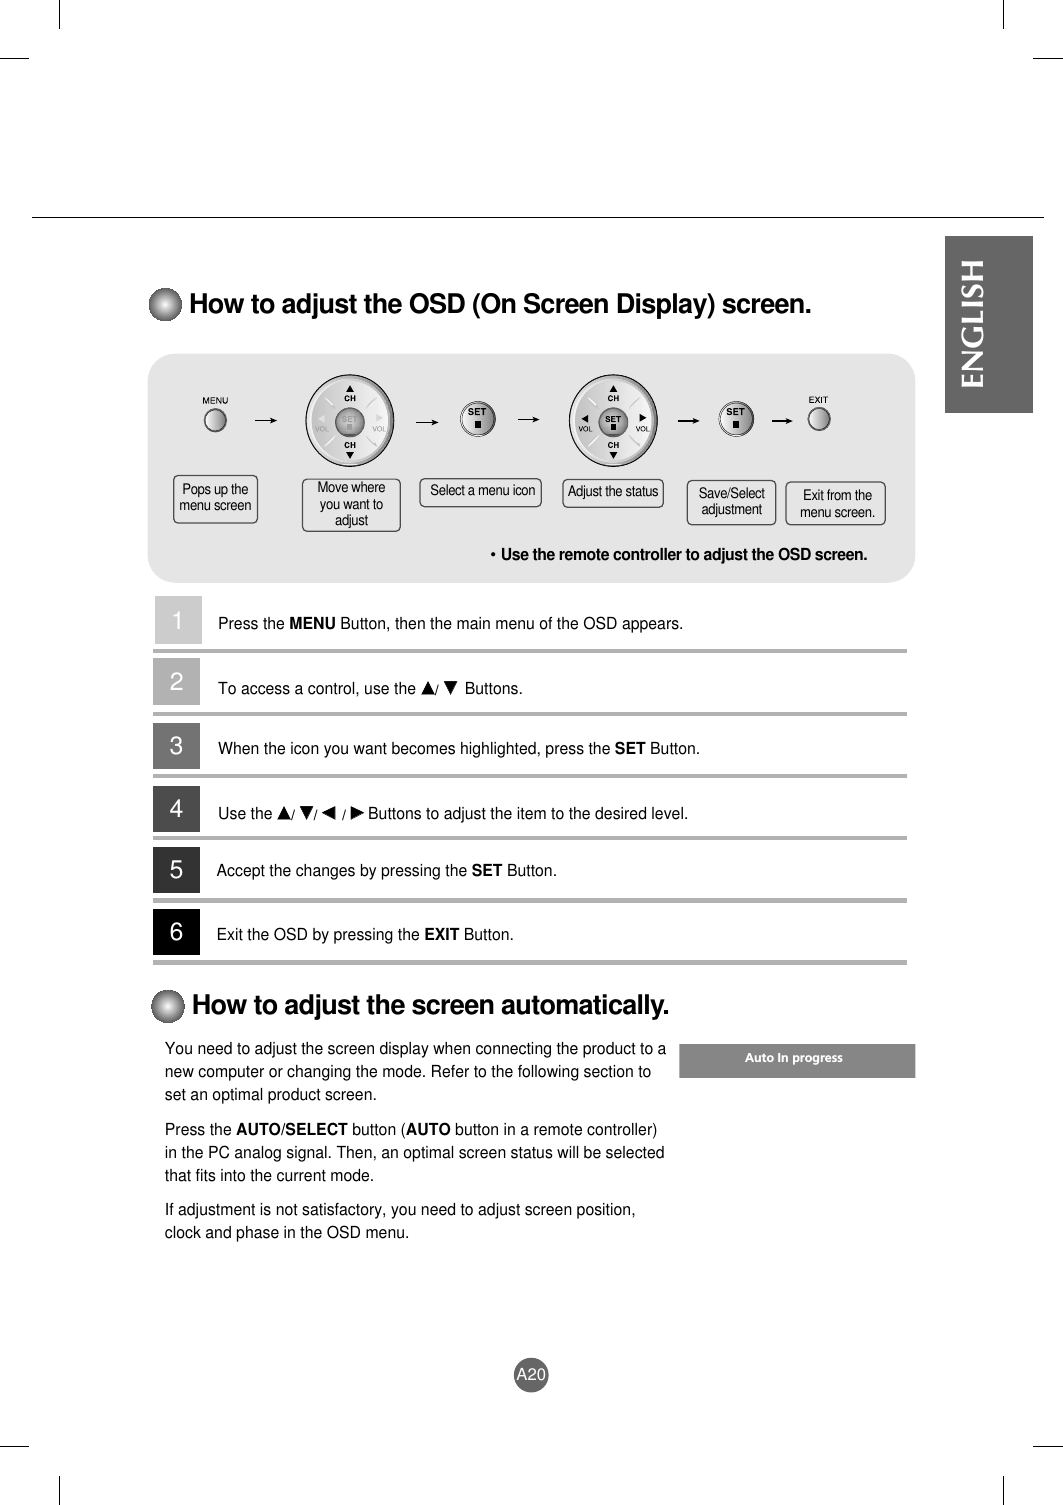 A20ENGLISHHow to adjust the OSD (On Screen Display) screen.• Use the remote controller to adjust the OSD screen.How to adjust the screen automatically.You need to adjust the screen display when connecting the product to anew computer or changing the mode. Refer to the following section toset an optimal product screen.Press the AUTO/SELECT button (AUTO button in a remote controller)in the PC analog signal. Then, an optimal screen status will be selectedthat fits into the current mode.If adjustment is not satisfactory, you need to adjust screen position,clock and phase in the OSD menu.Pops up themenu screenMove whereyou want toadjustSelect a menu icon Adjust the status Save/Selectadjustment Exit from themenu screen.Press the MENU Button, then the main menu of the OSD appears.To access a control, use the DD/ EE  Buttons. When the icon you want becomes highlighted, press the SET Button.Use theDD/ EE/ FF  / GGButtons to adjust the item to the desired level.Accept the changes by pressing the SET Button.Exit the OSD by pressing the EXIT Button.123456Auto In progress